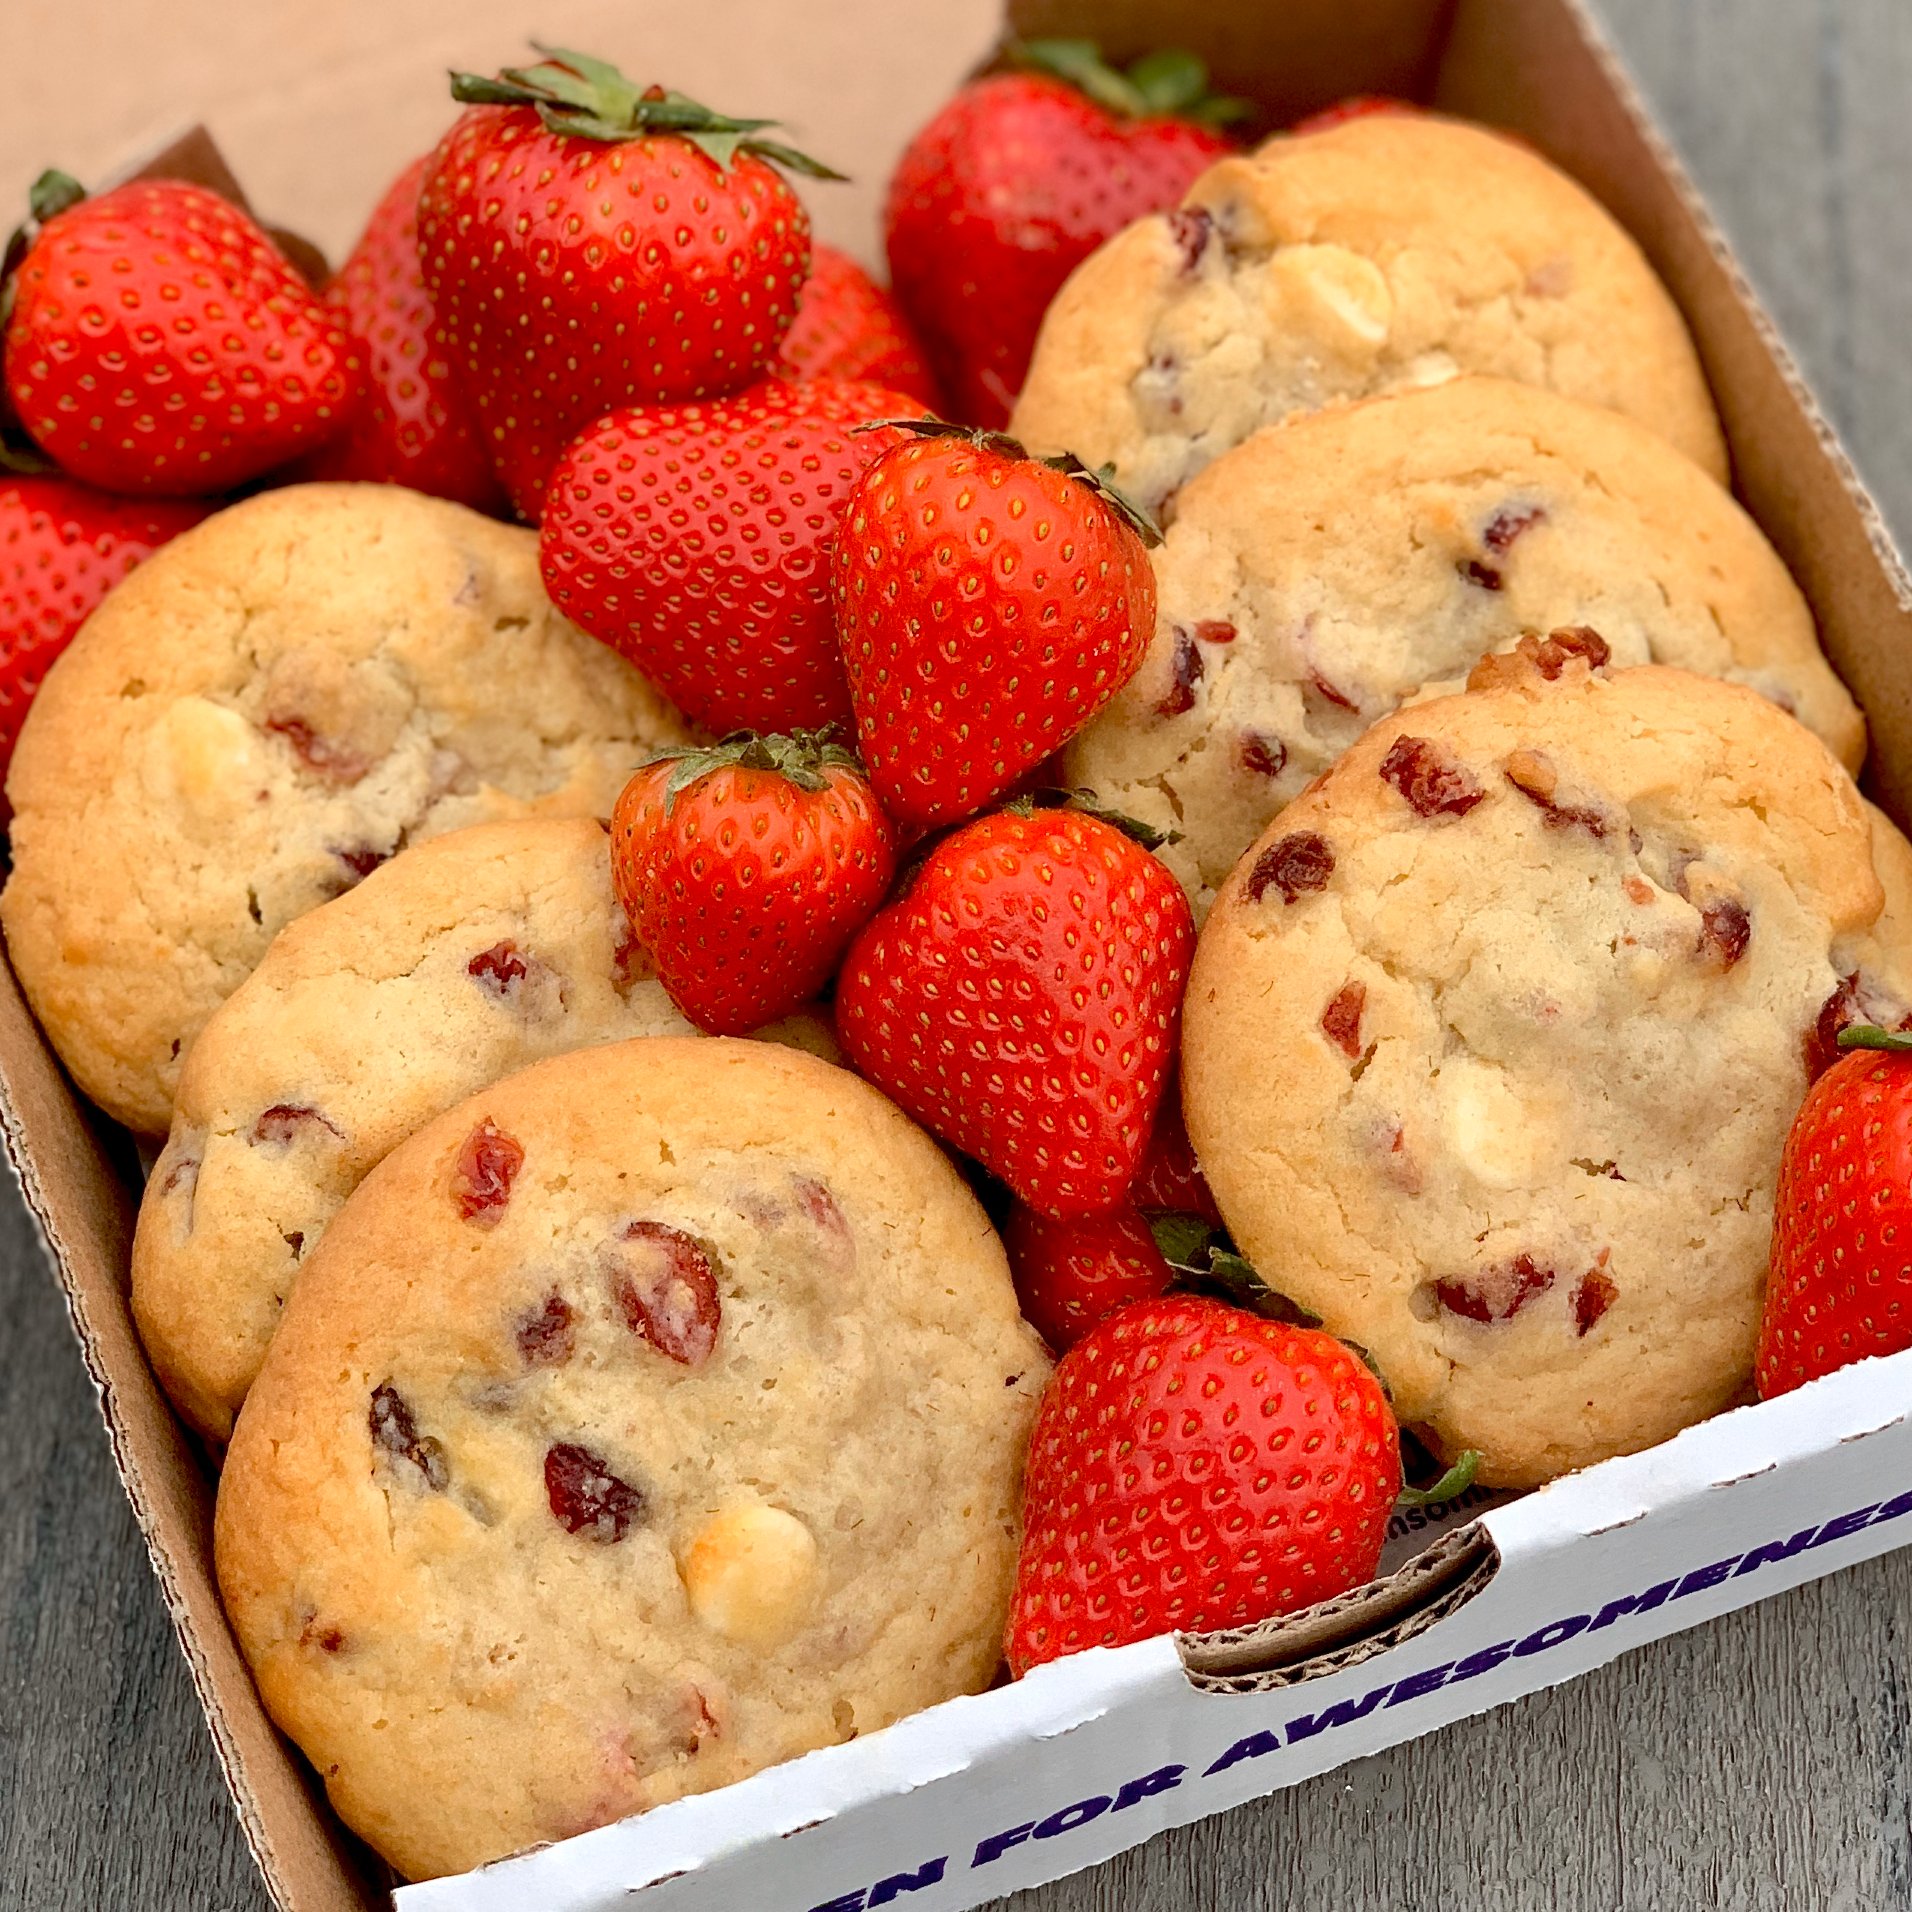 Insomnia Cookies Our New Strawberry Shortcake Cookie Made Of Buttery Shortcake Filled With Strawberries White Chocolate Has Officially Launched To Celebrate We Re Doing 6